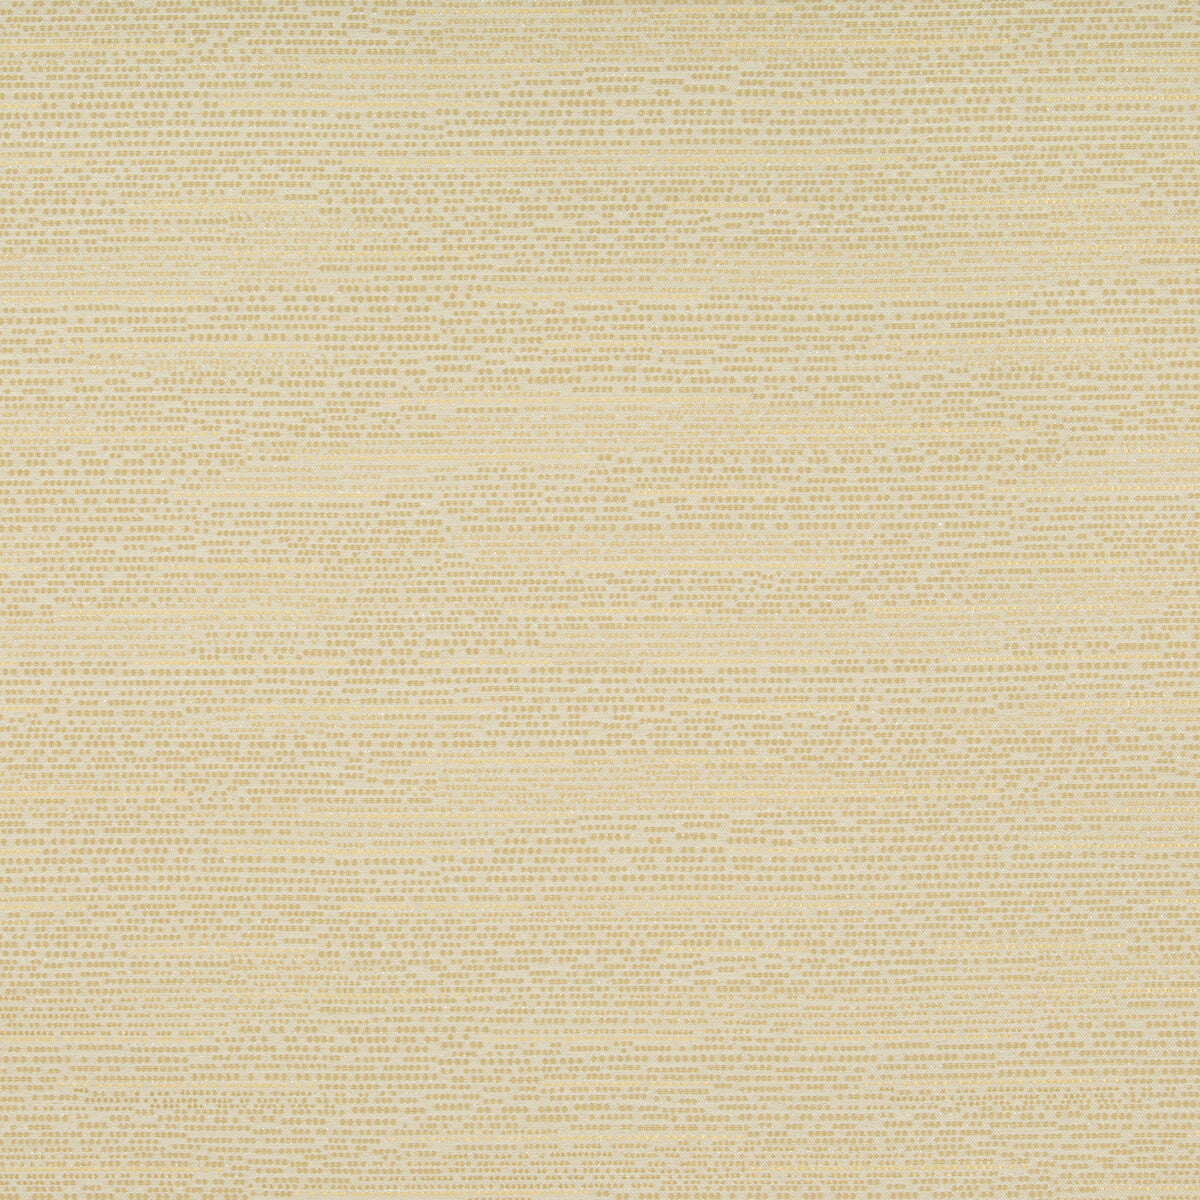 Waterline fabric in honey color - pattern 32934.14.0 - by Kravet Contract in the Gis Crypton collection